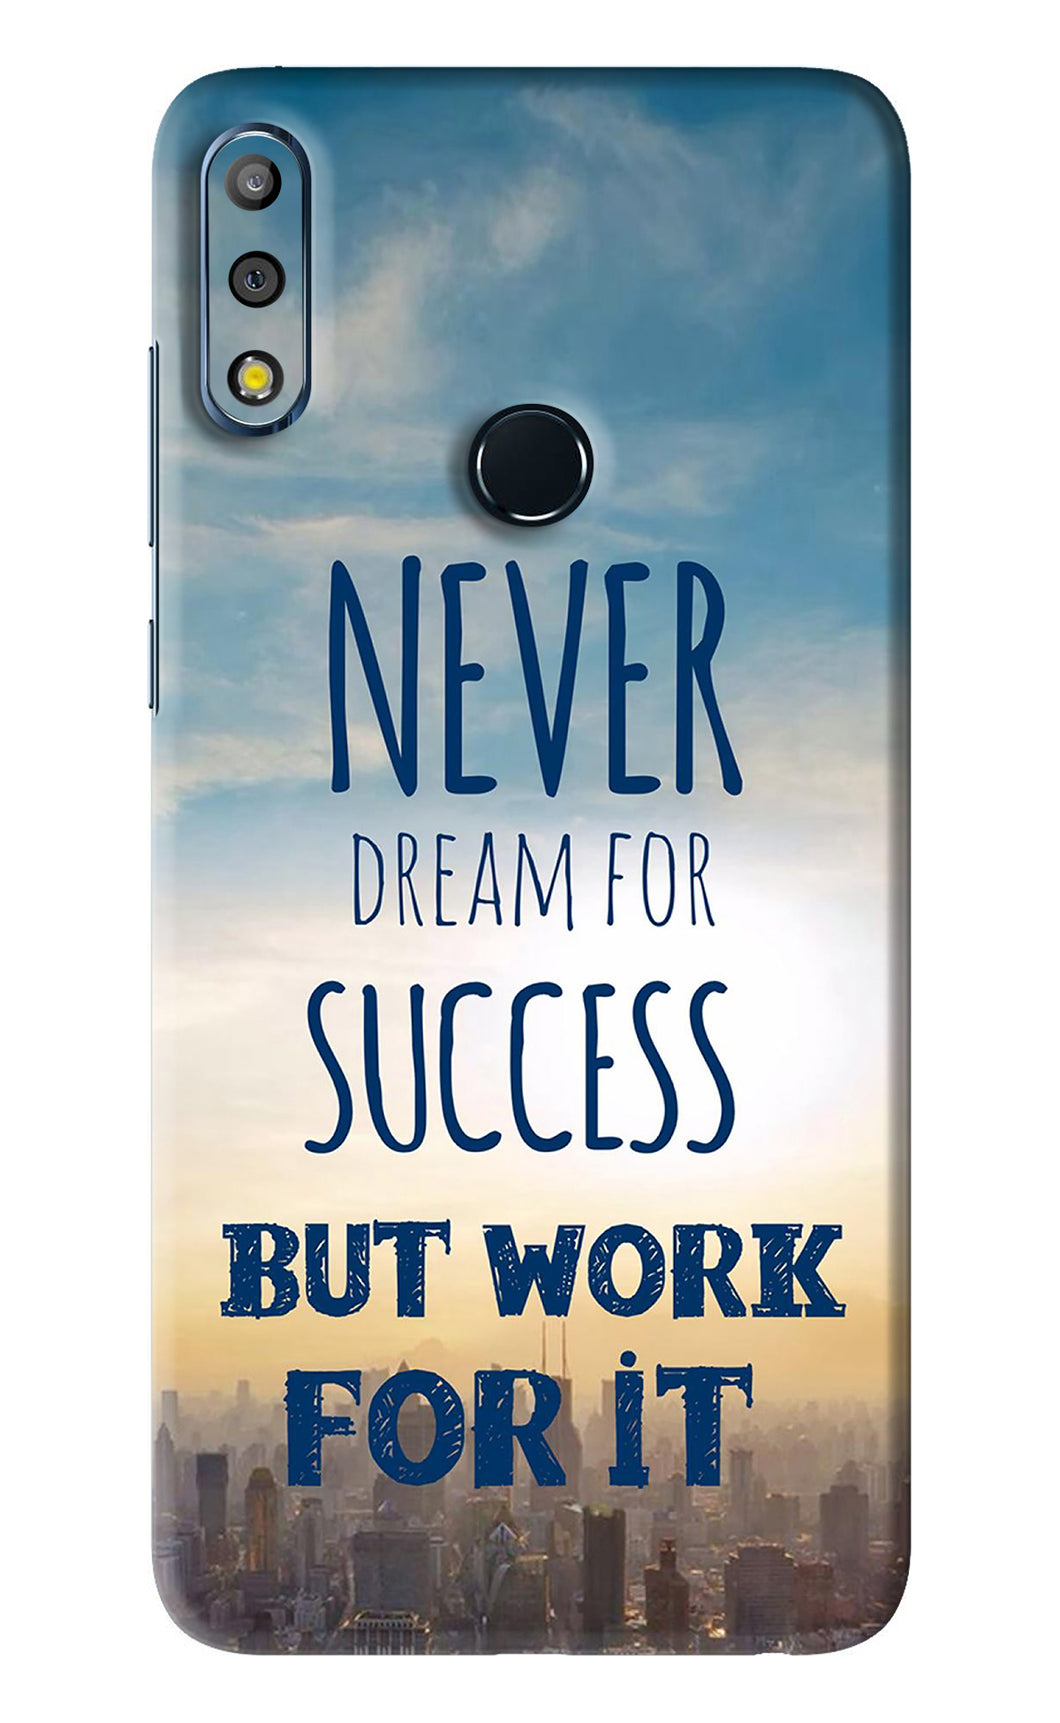 Never Dream For Success But Work For It Asus Zenfone Max Pro M2 Back Skin Wrap